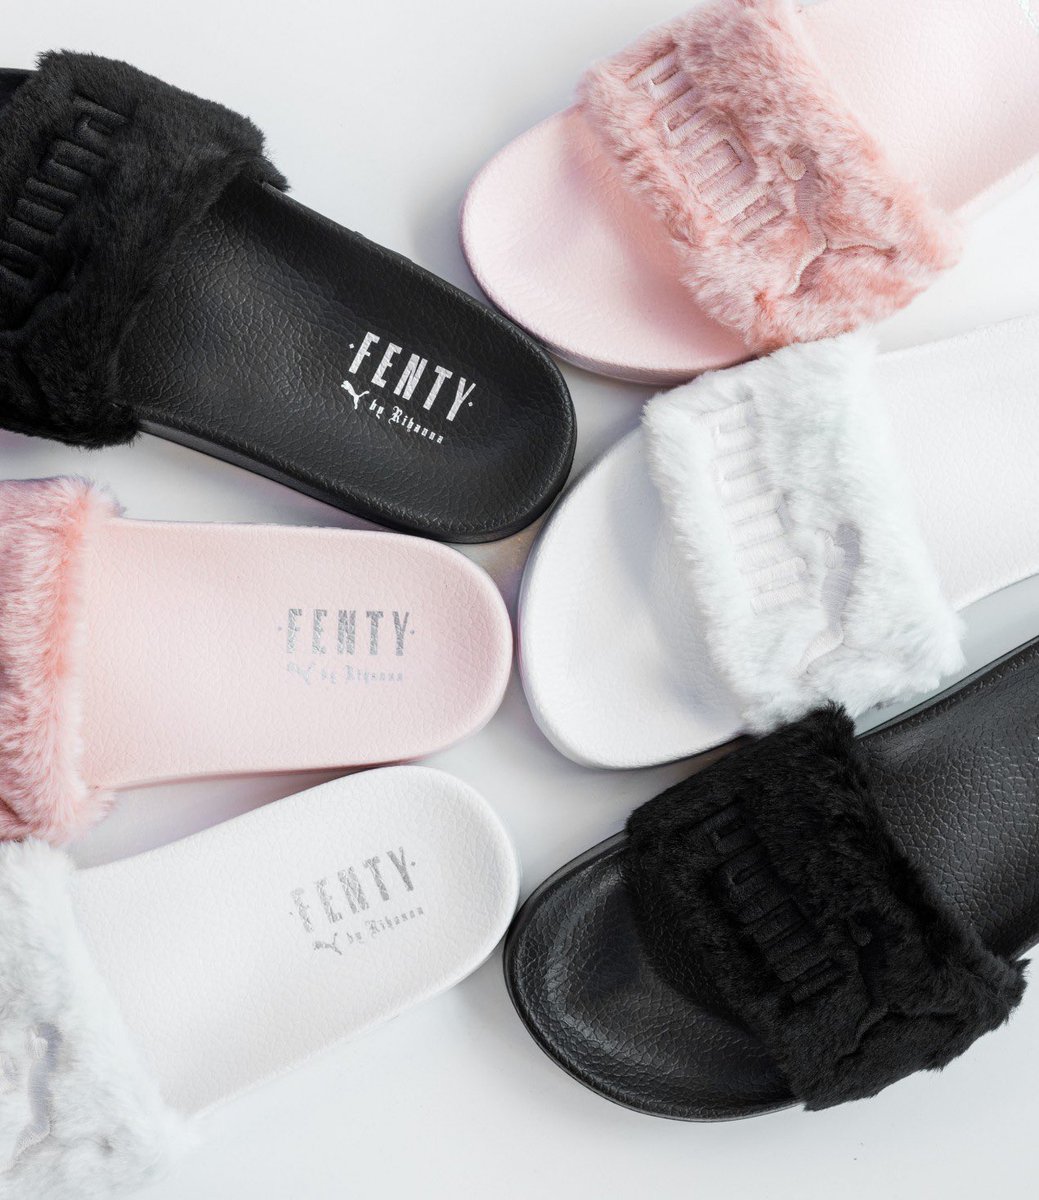 YALL REMEMBER THESE? Rihanna really had the world gagged and she gon do it again #FentyXPuma